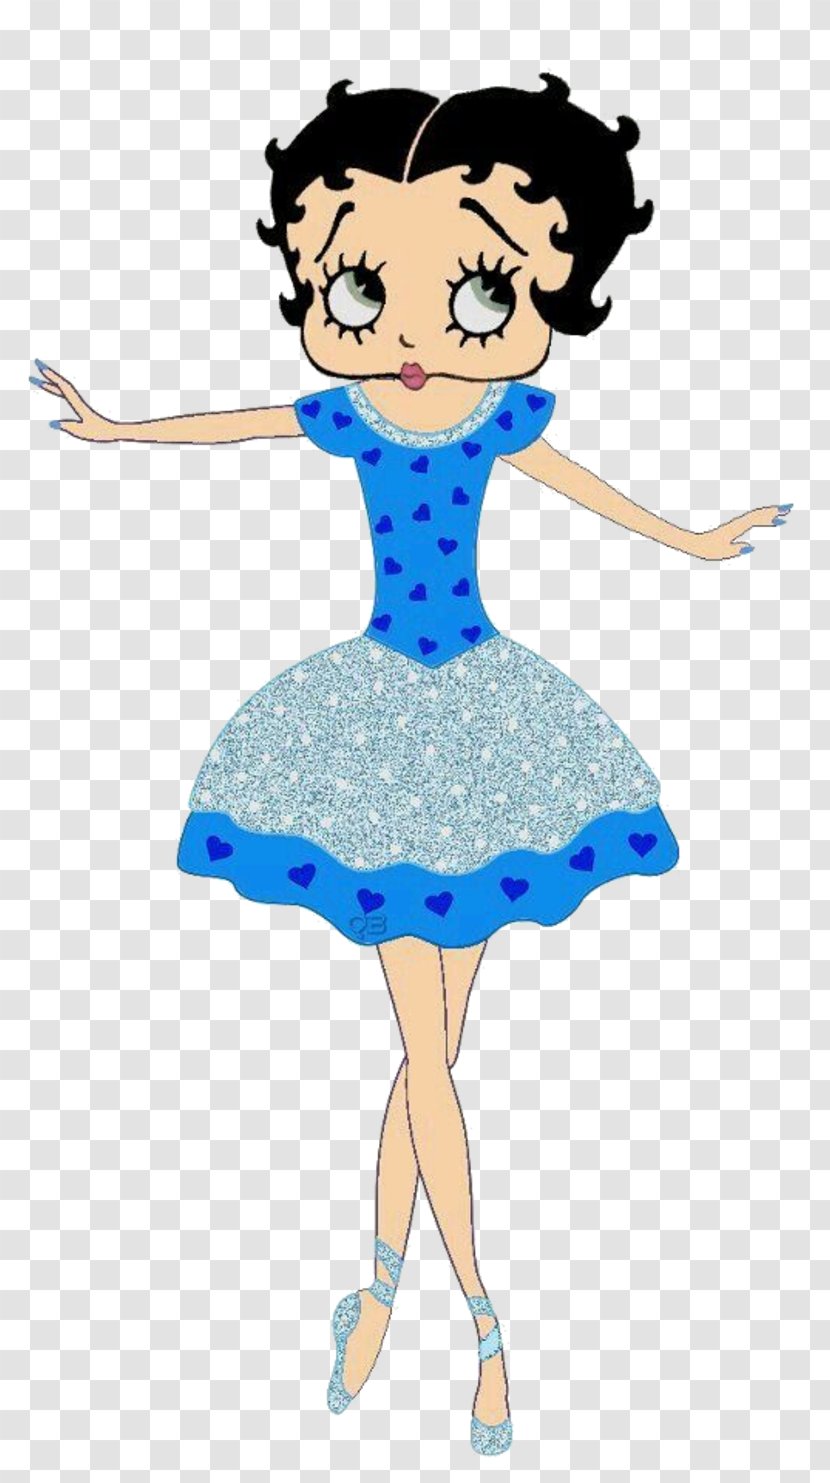 Betty Boop - Style - Costume Dance Transparent PNG